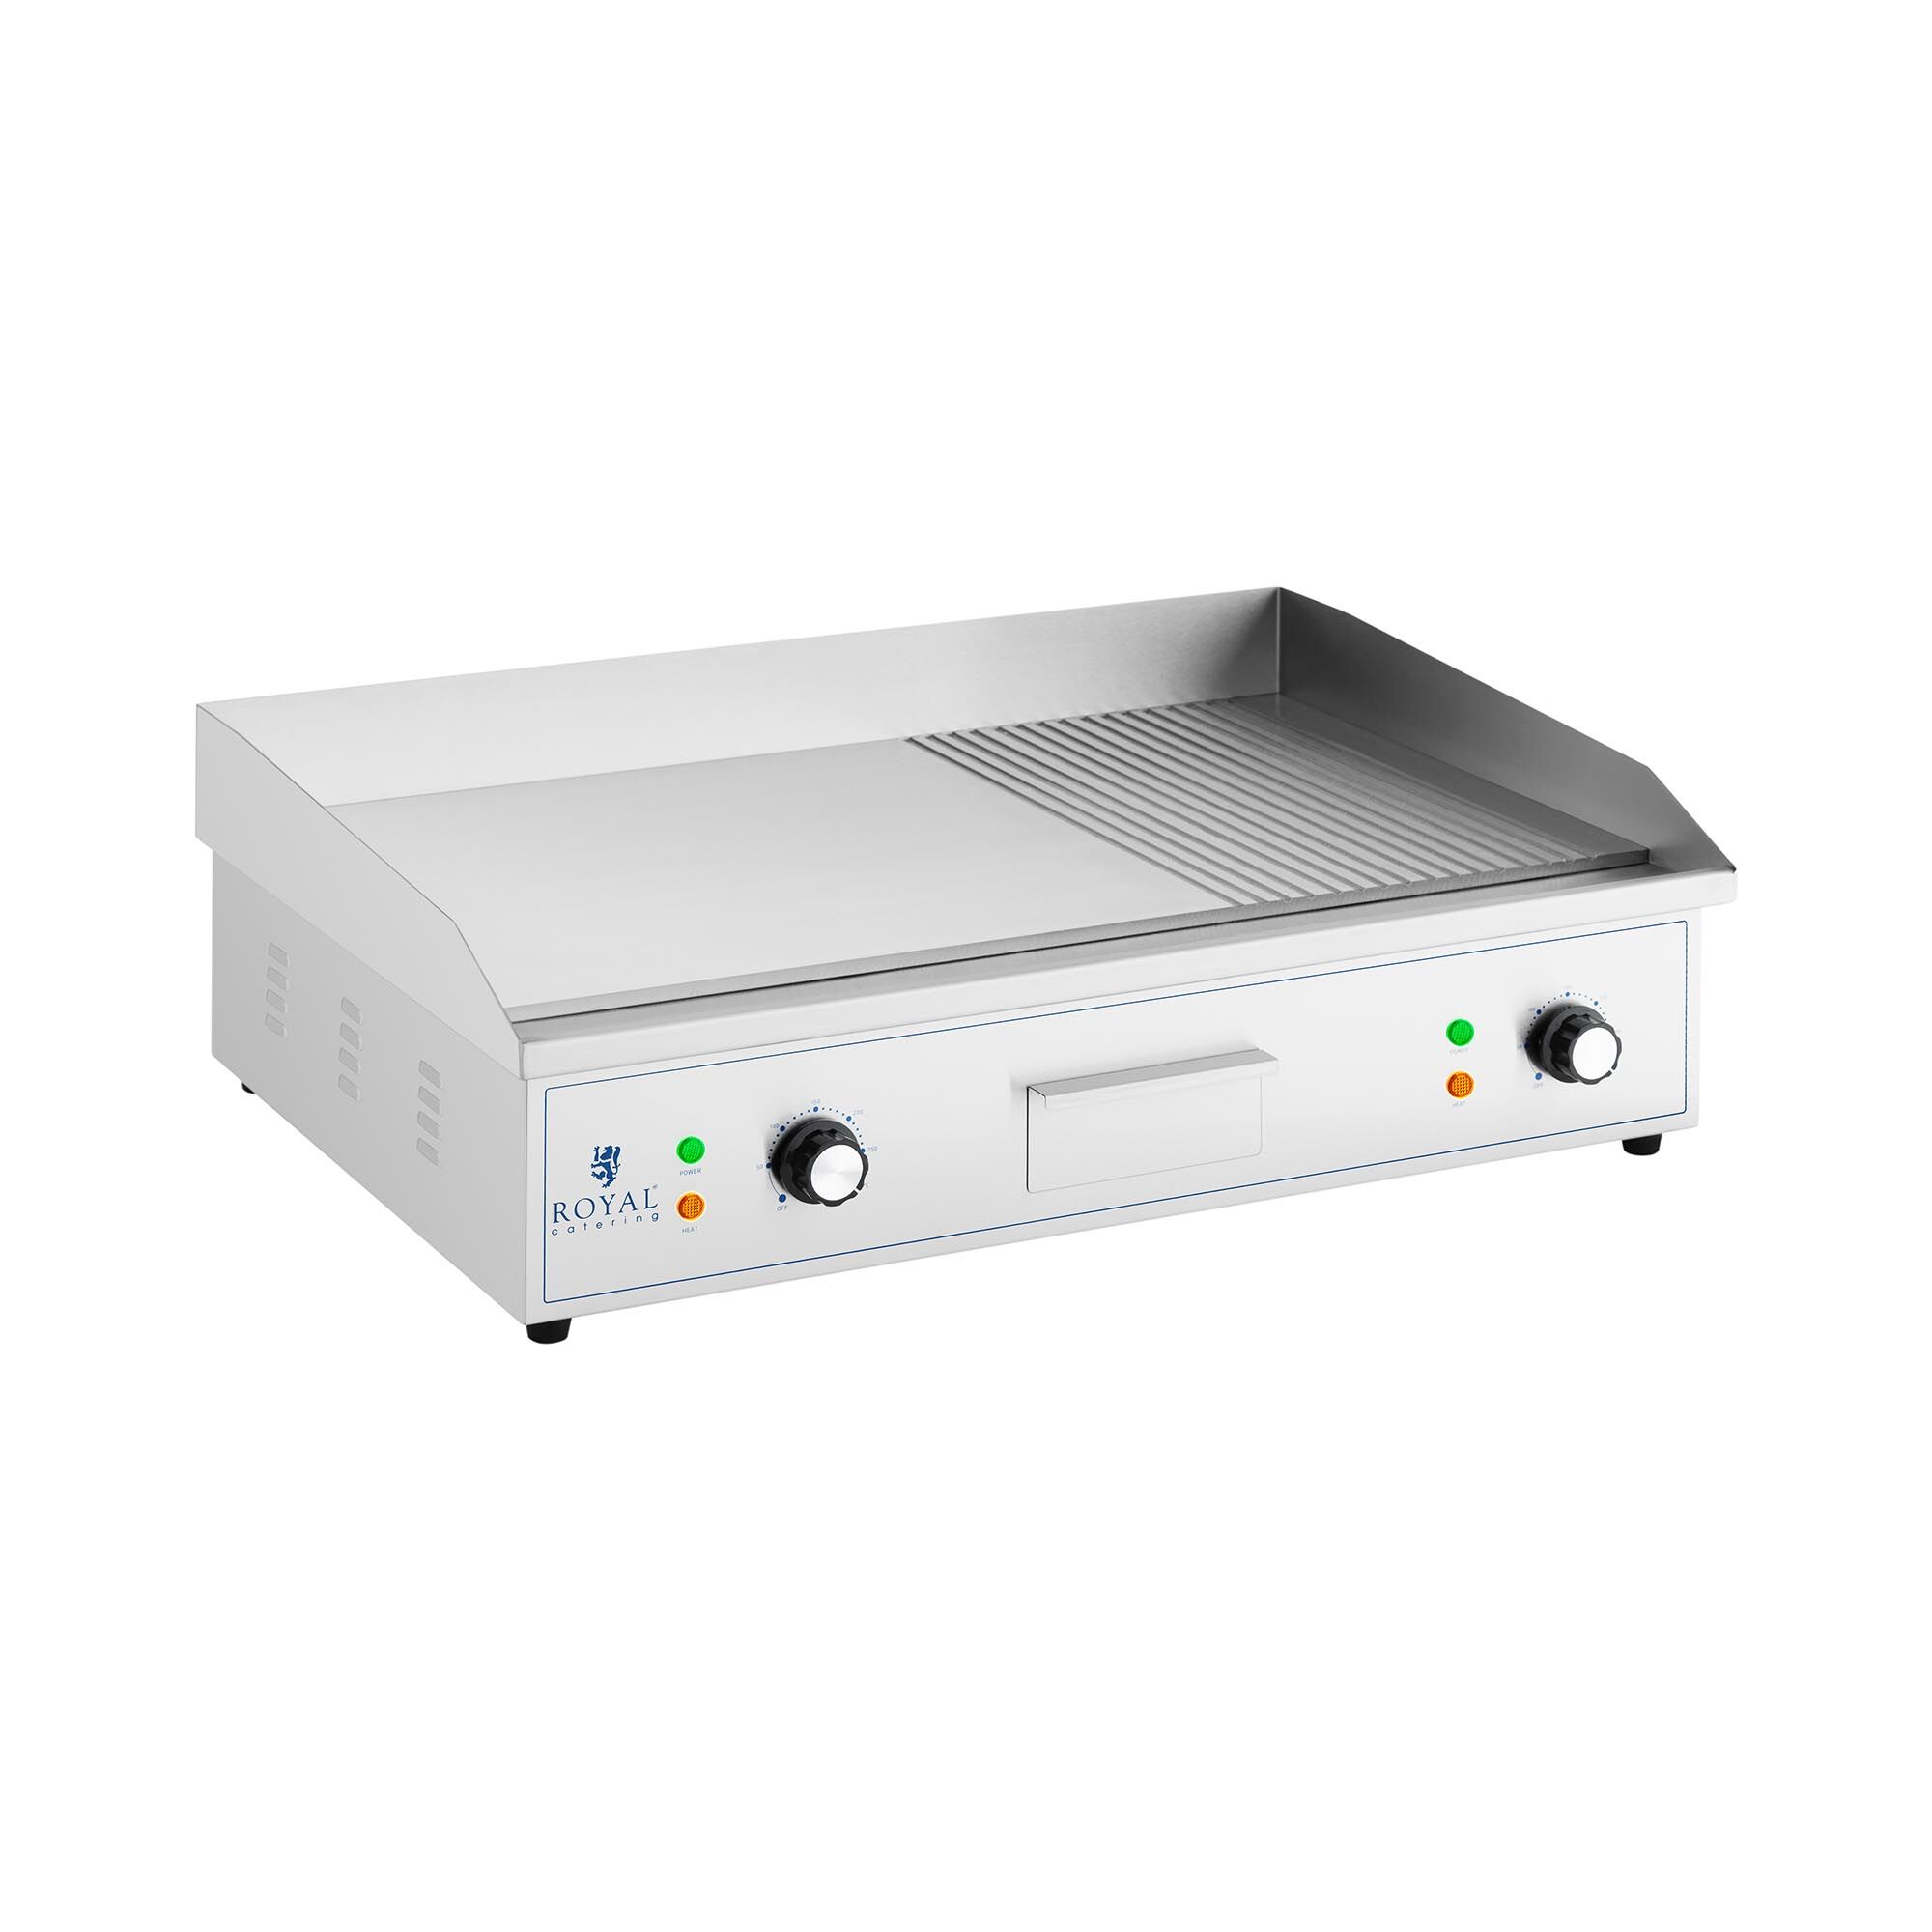 Royal Catering Fry top elettrico - Piastra liscia in acciaio inox - 727 x 420 mm - 3000 W RCPG51-M